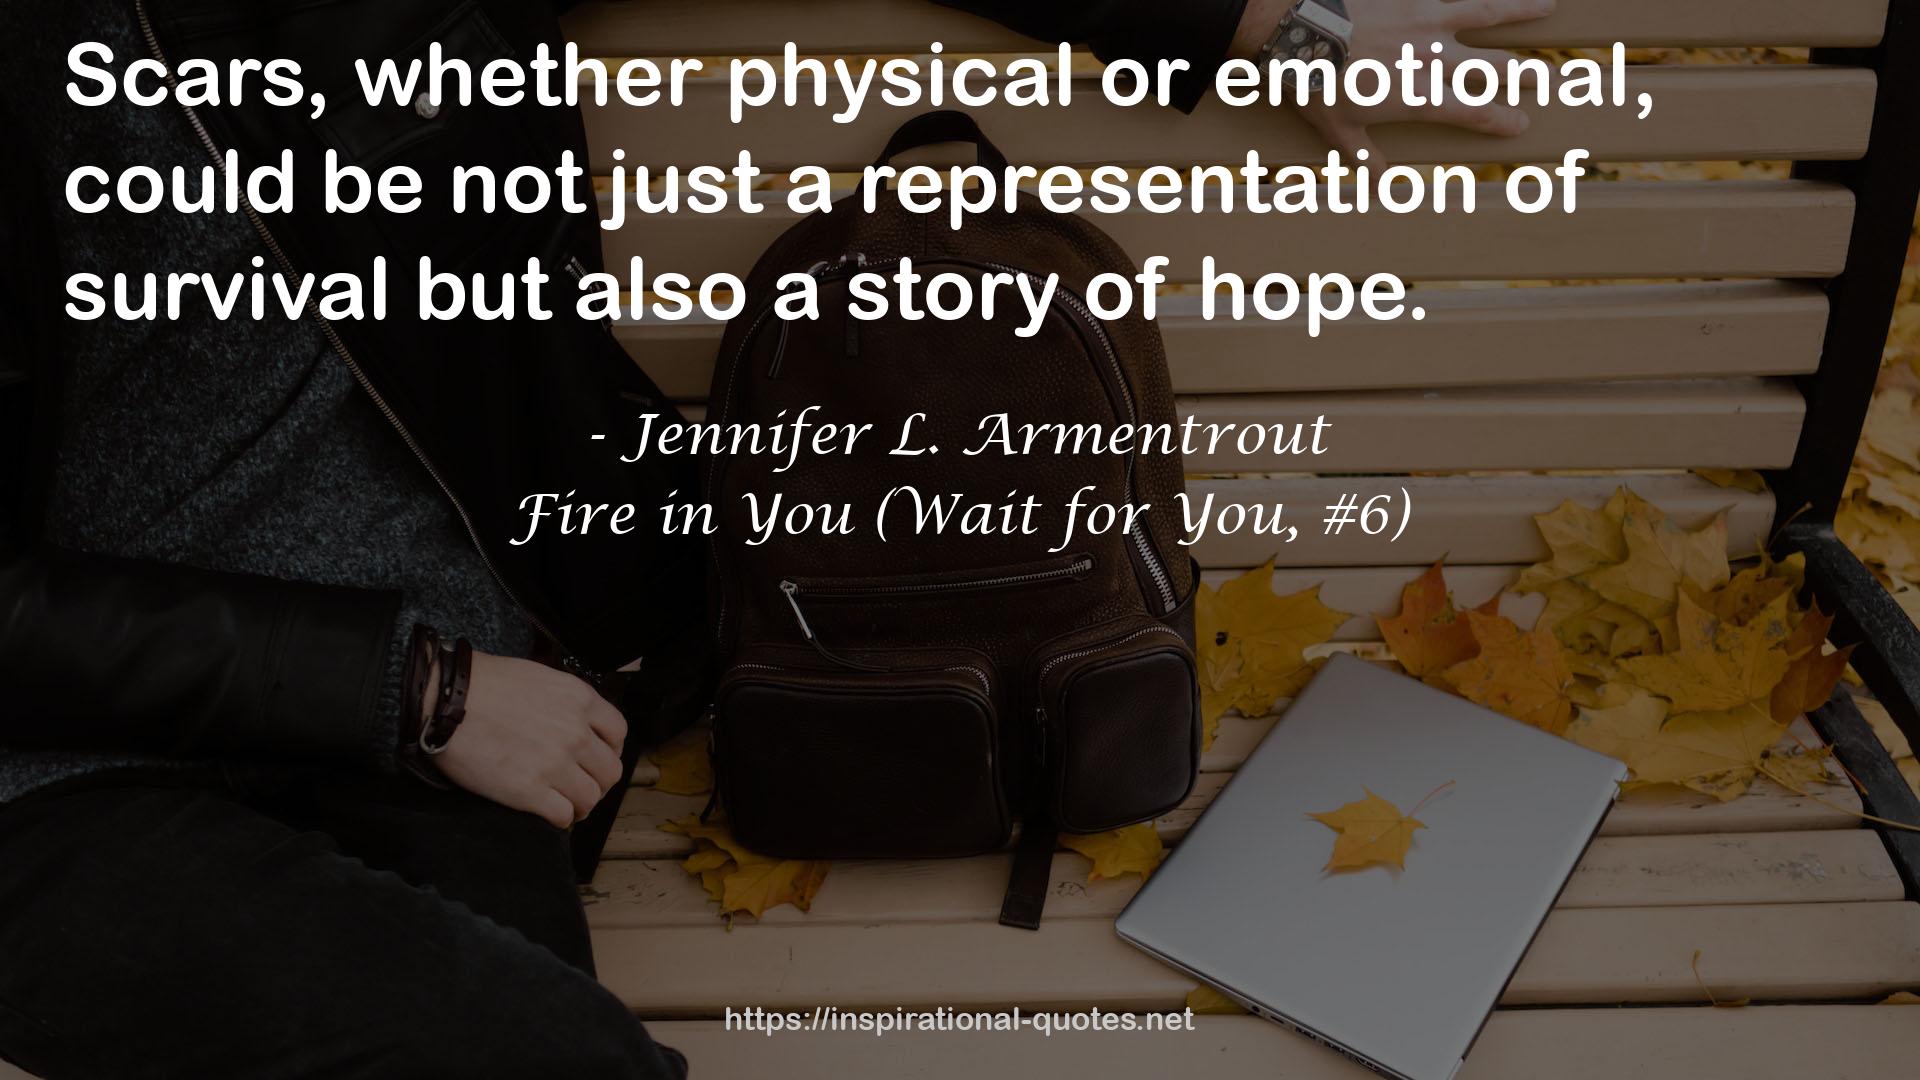 Fire in You (Wait for You, #6) QUOTES